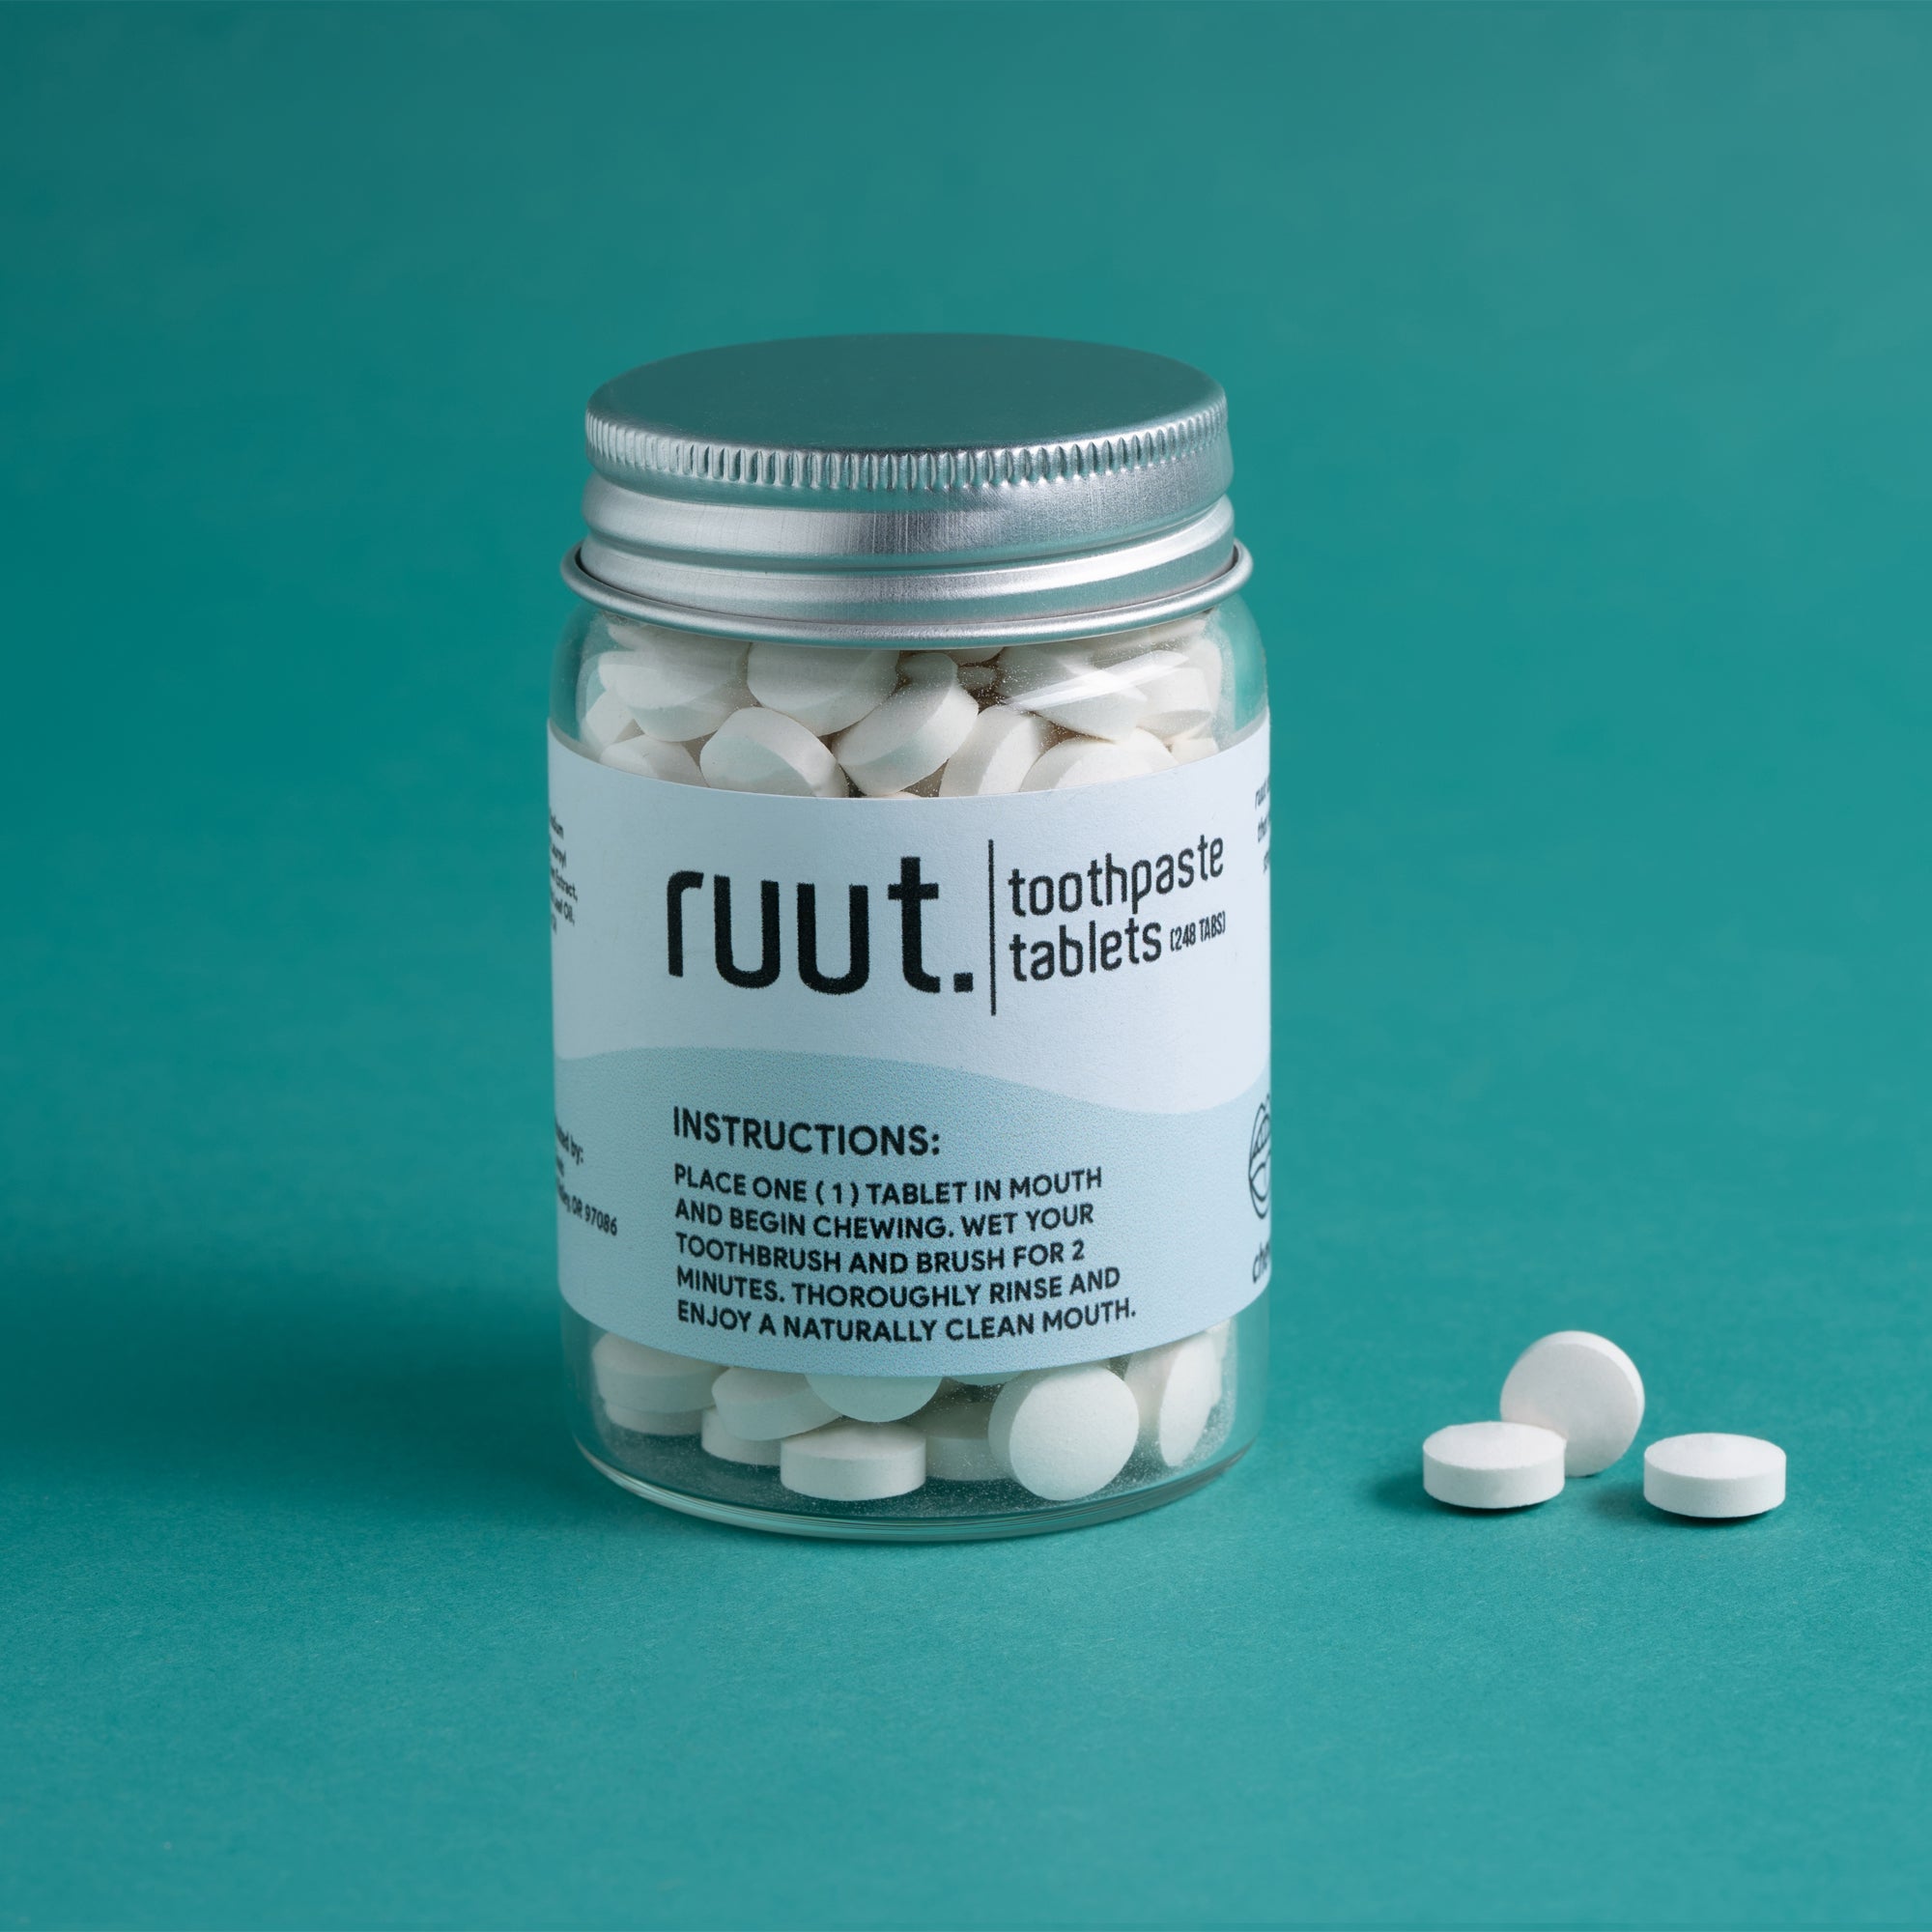 Ruut Toothpaste Tablets - Subscription